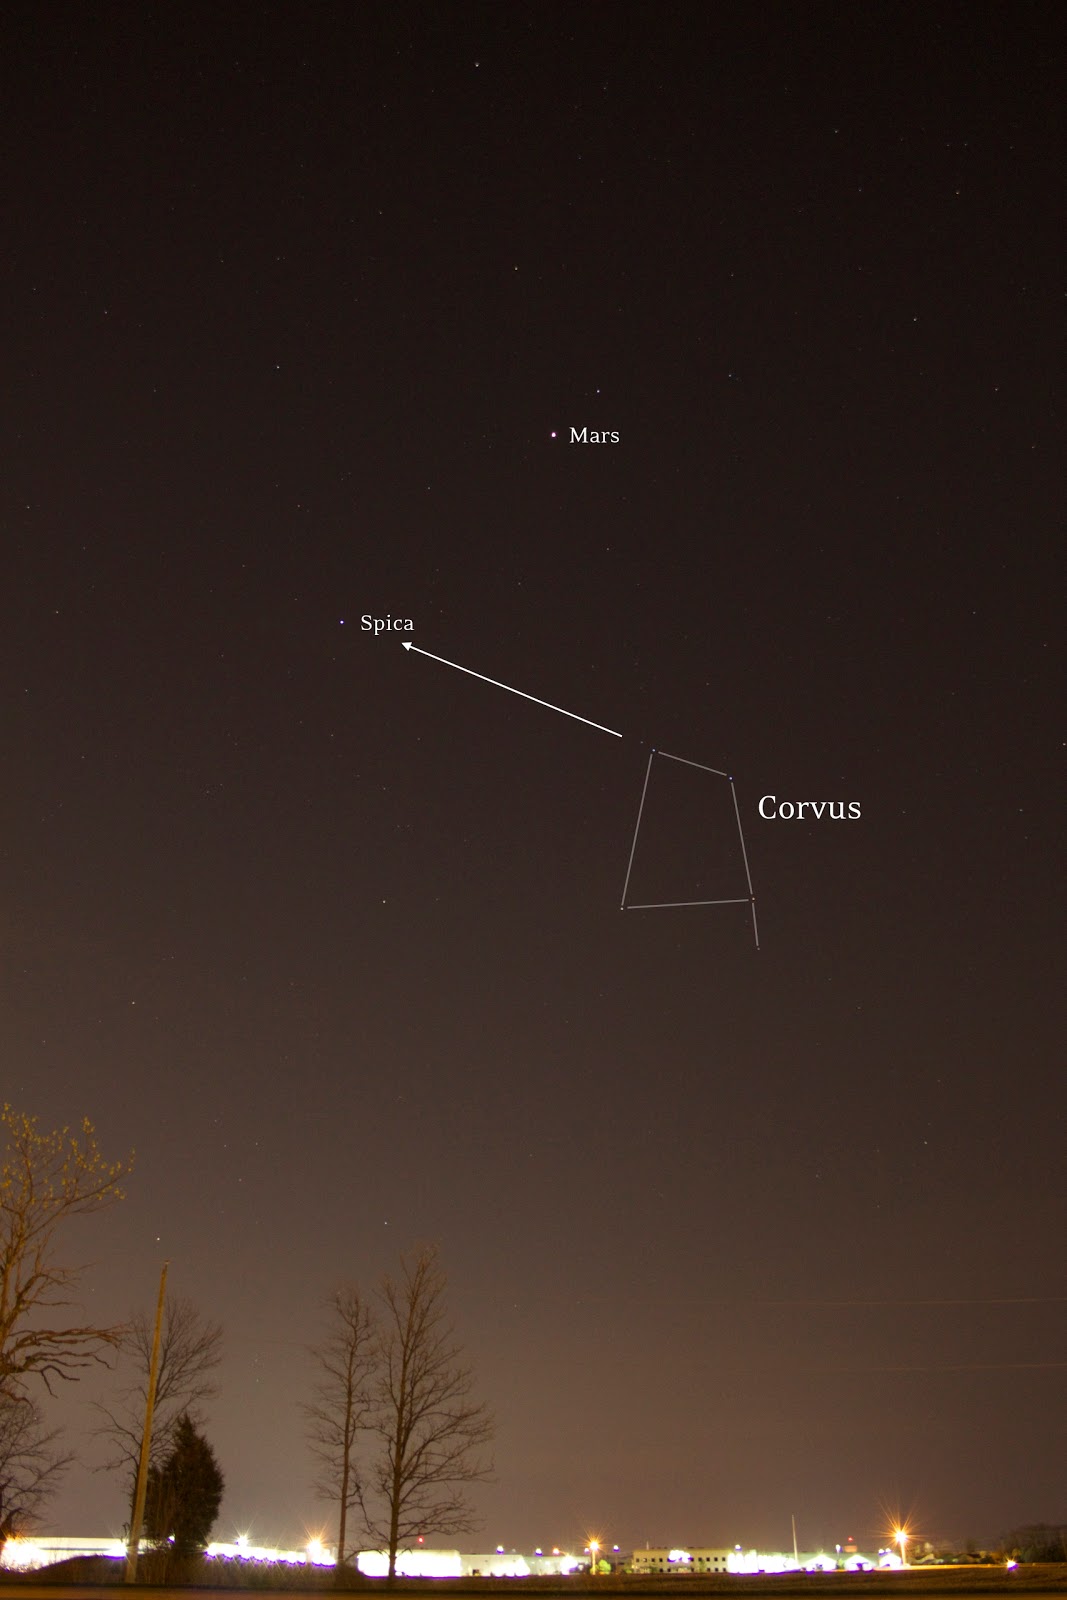 corvus point to spica